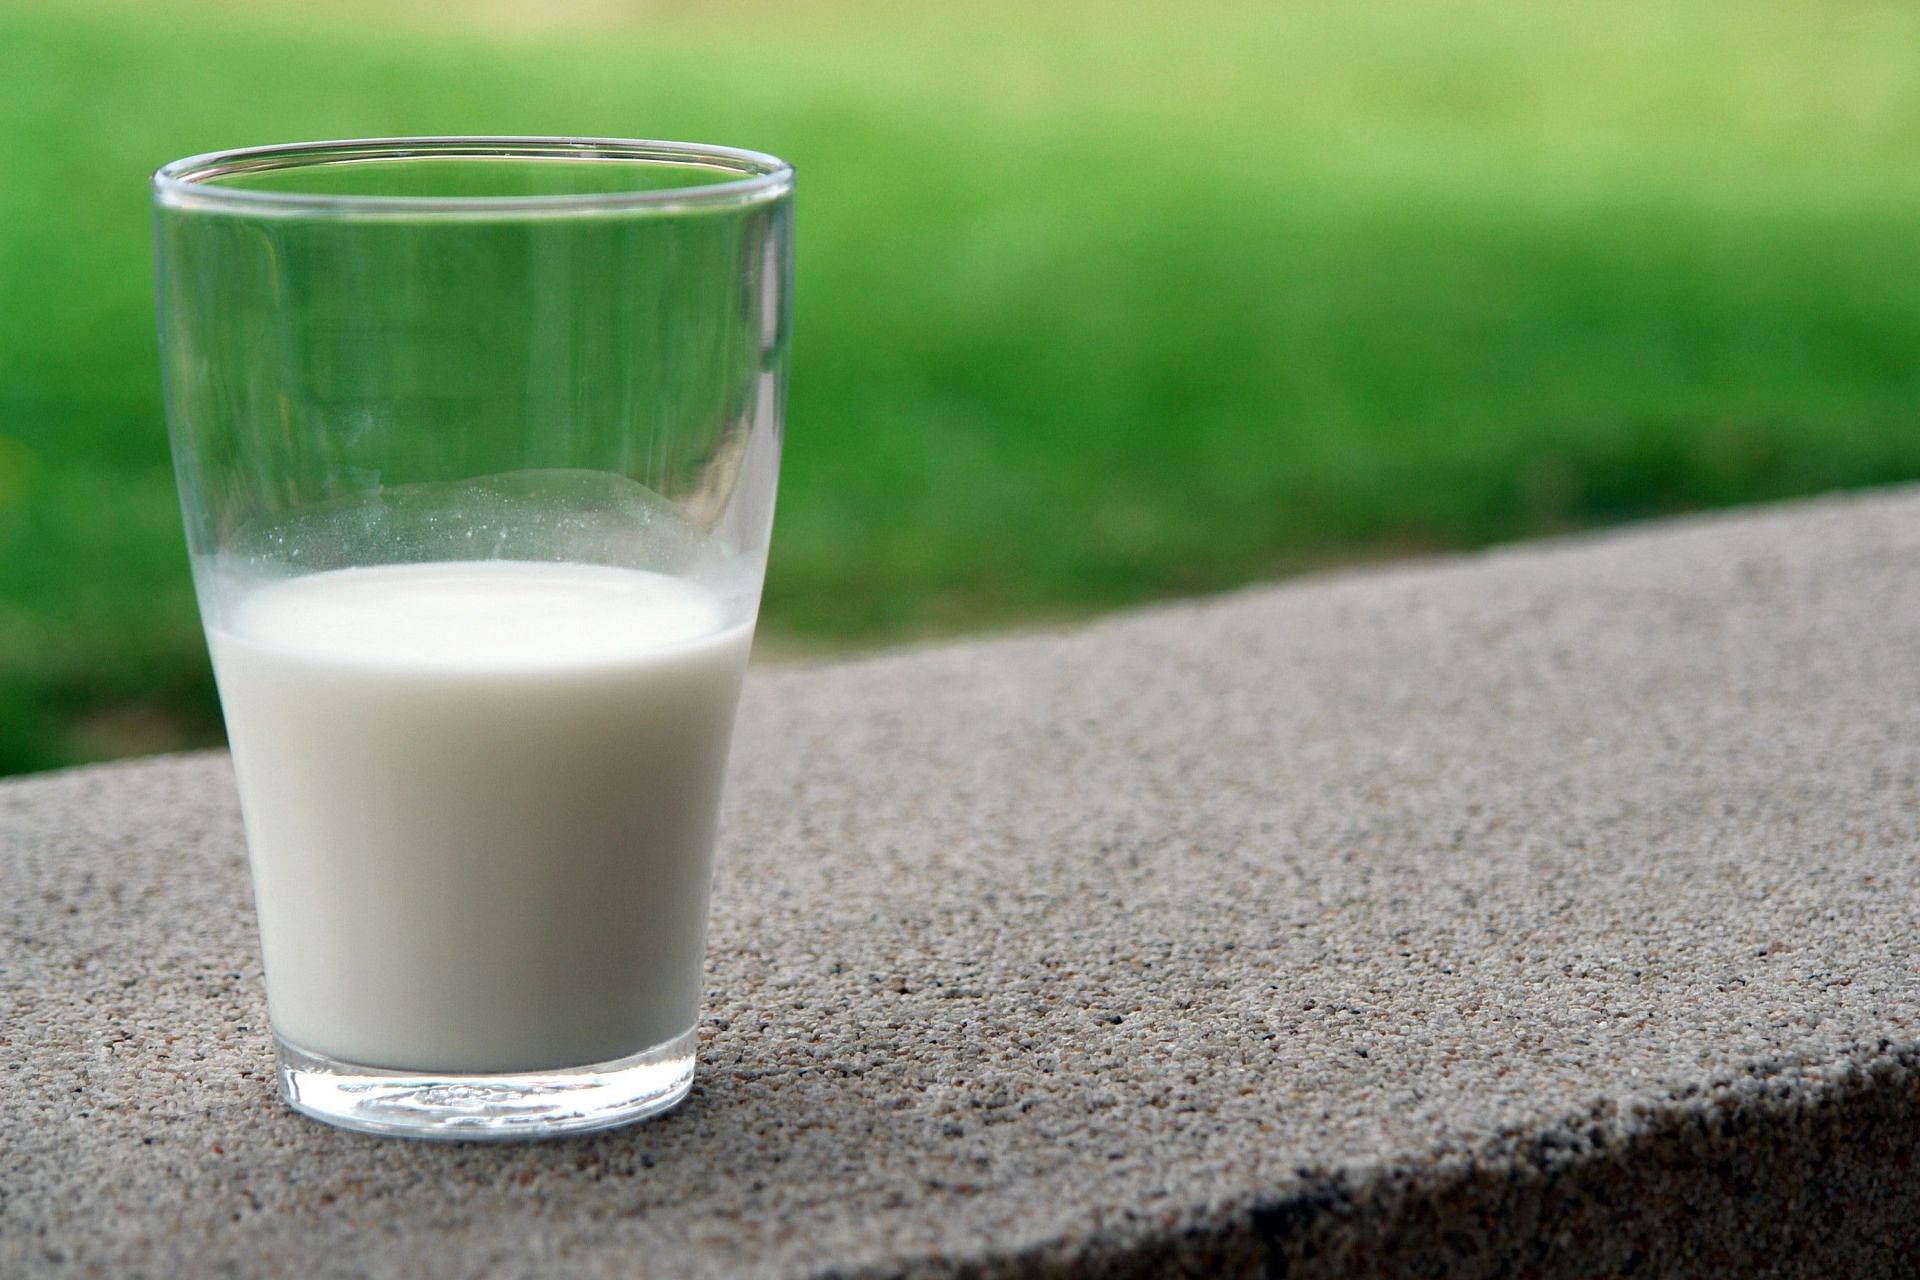 Get the facts straight on milk and dispel common myths to make informed decisions about your diet. (image via Pexels)